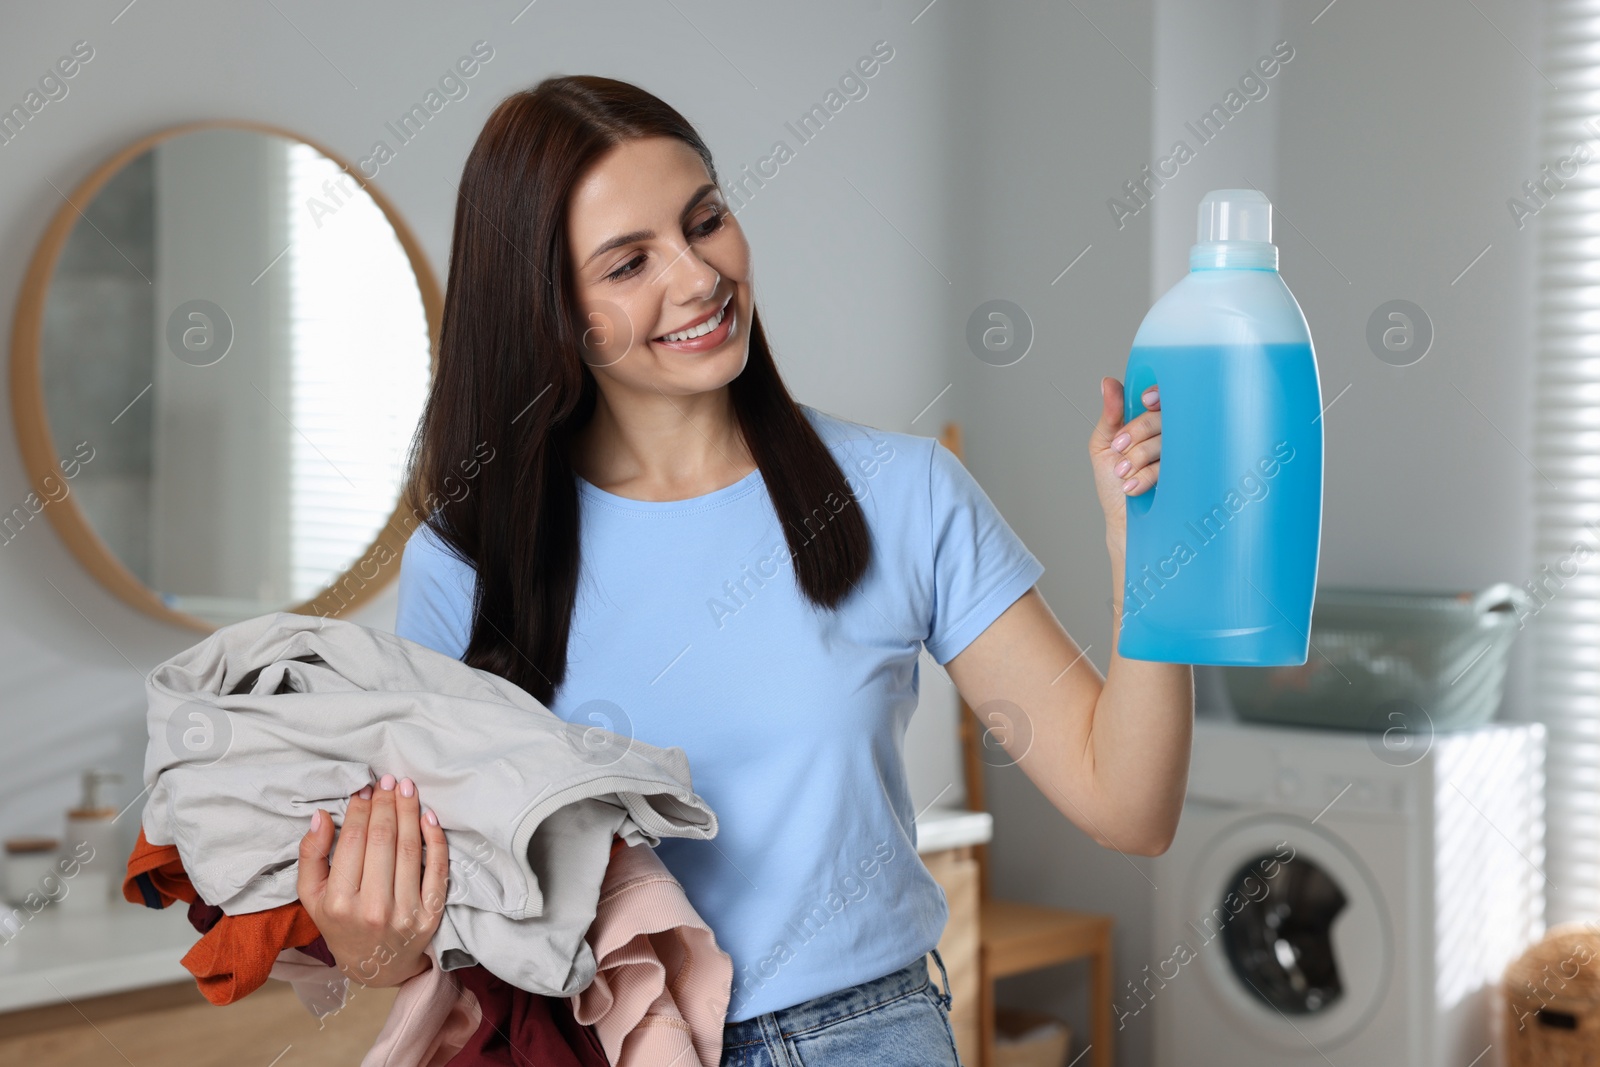 Photo of Woman holding fabric softener and dirty clothes in bathroom